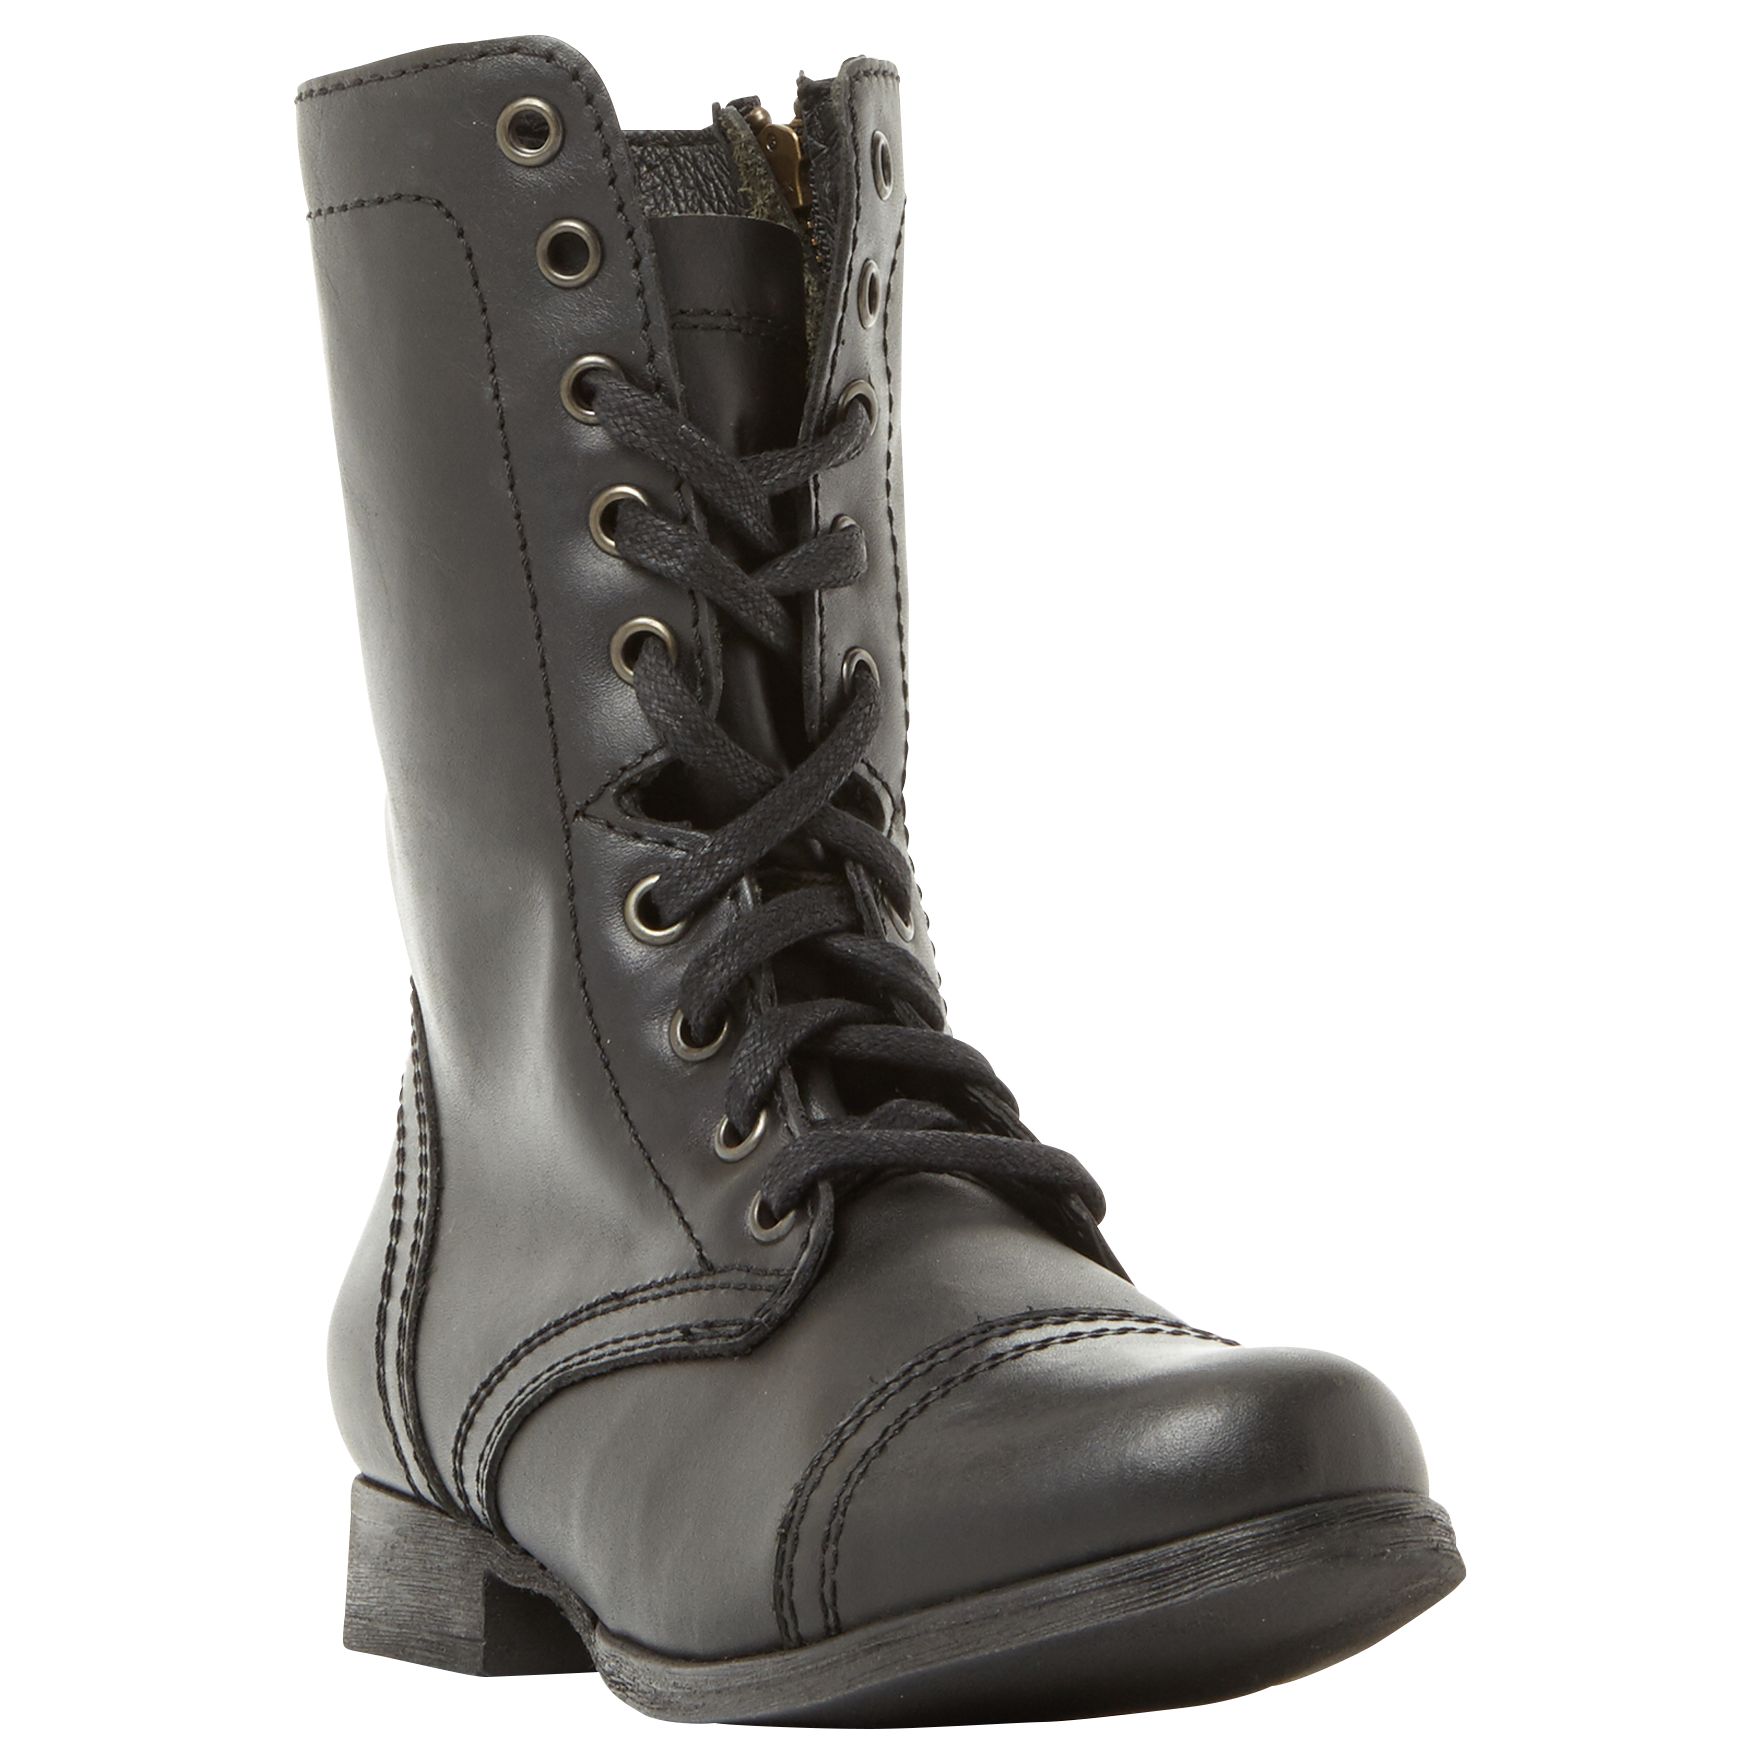 Steve Madden Troopa Lace Up Boots, Black, 3